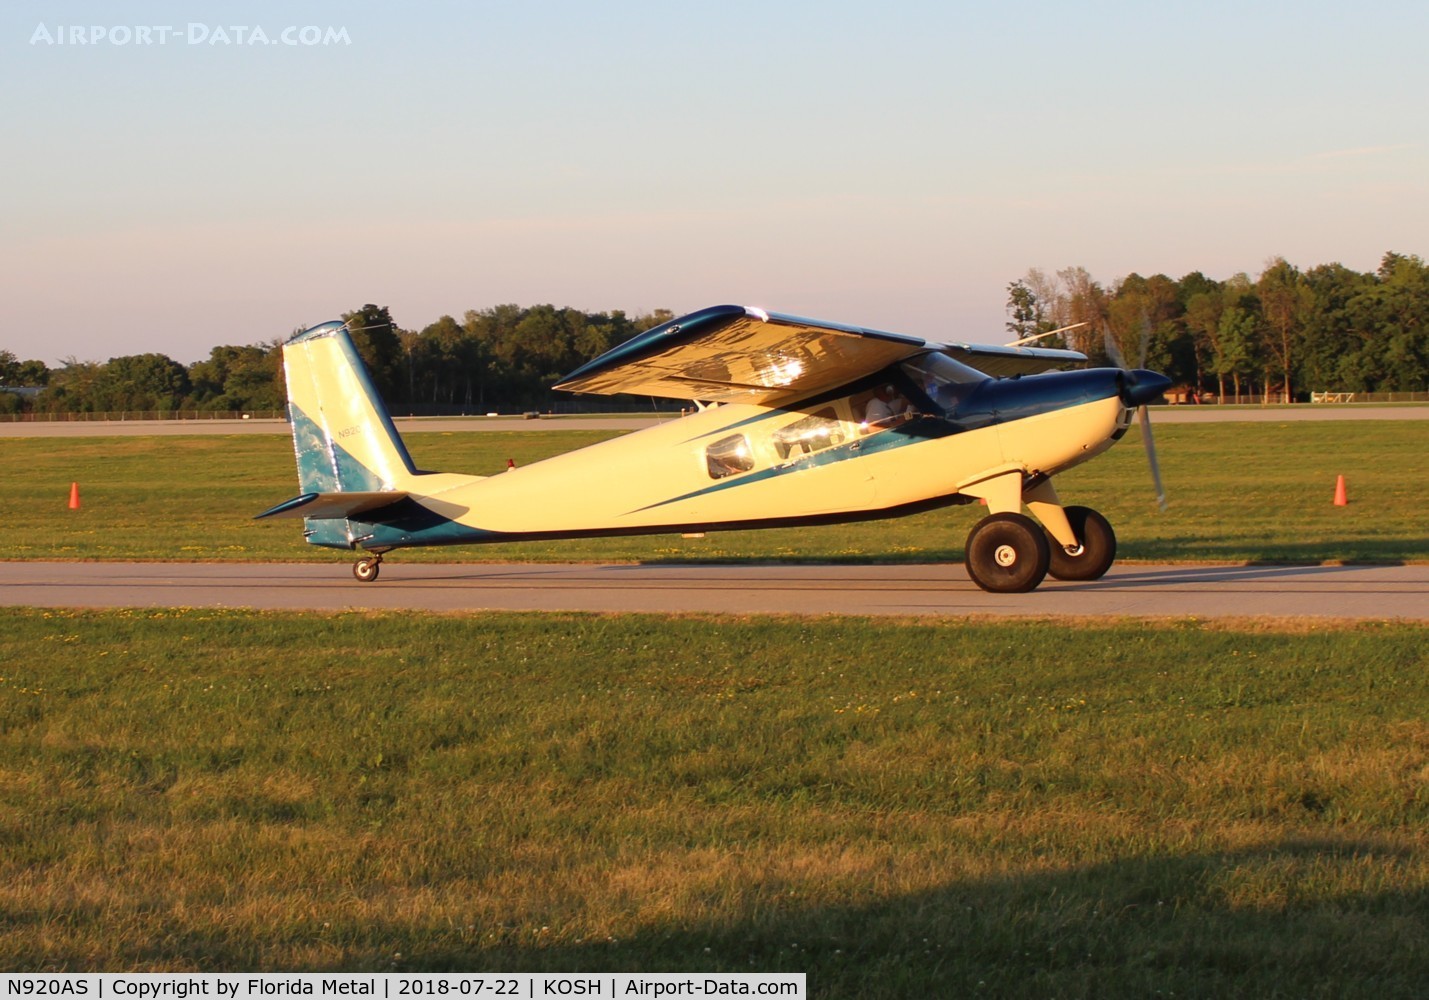 N920AS, 1967 Helio H-295-1200 Super Courier C/N 1279, Helio Super Courier